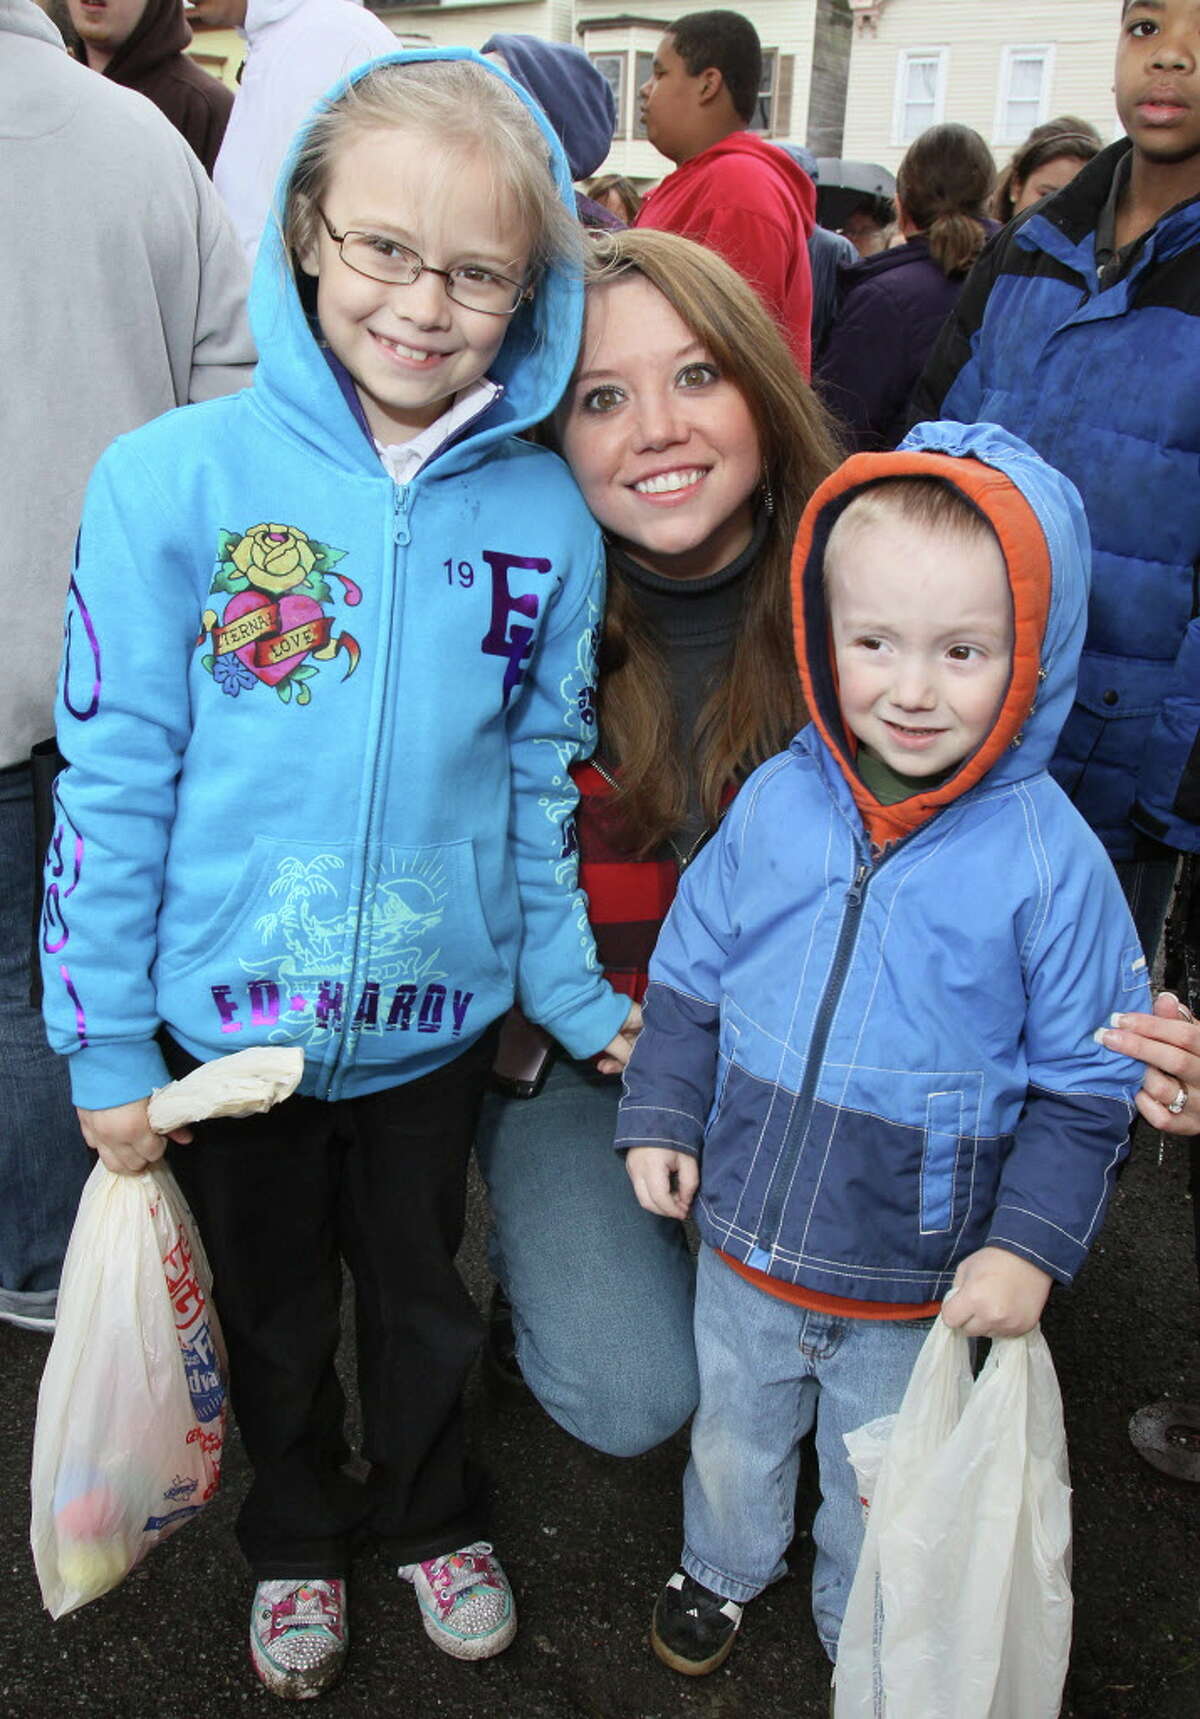 Albany, NY - April 23, 2011 - (Photo by Joe Putrock/Special to the Times Union) - Jessica Blain-Lewis(center) brought her children Hannah(left) and Owen(right) to the Anti-Gun Violence Egg Hunt.